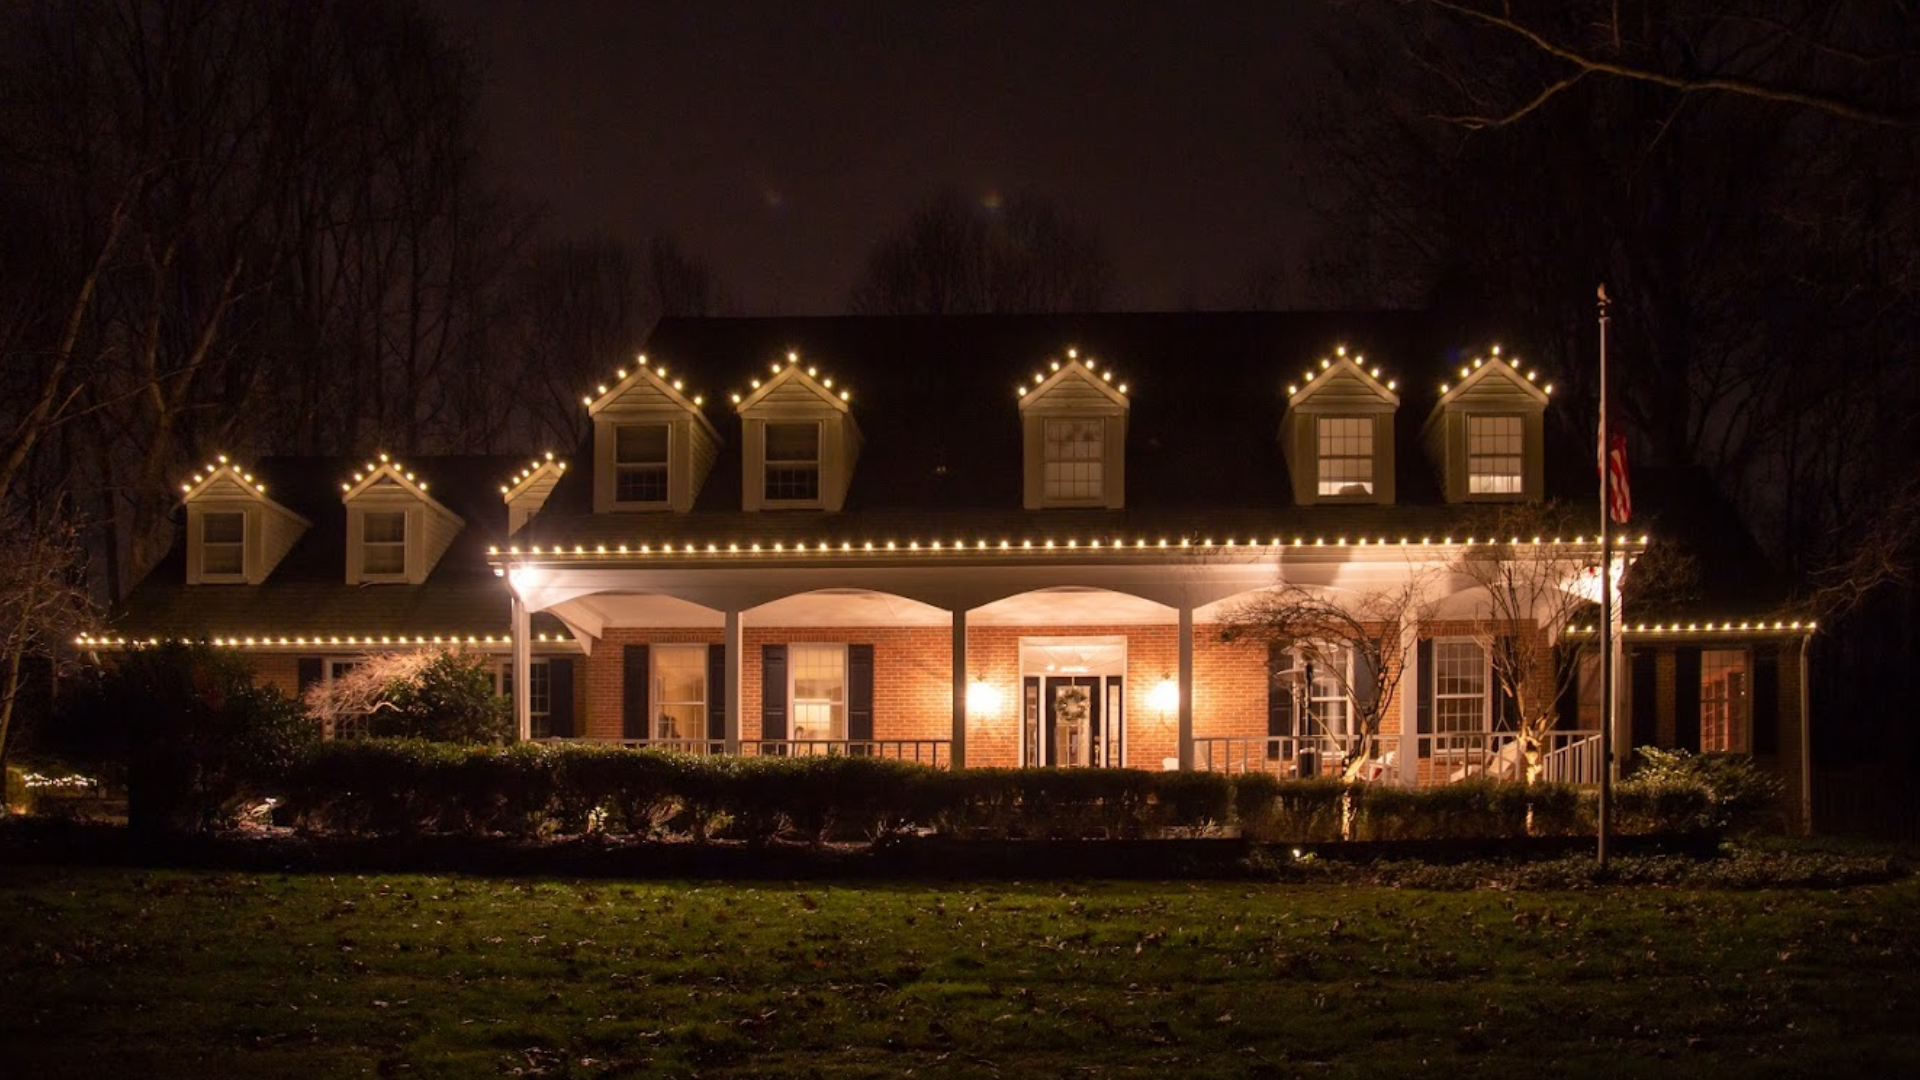 A beautiful home with Christmas lights adorning its exterior in Arlington, VA.